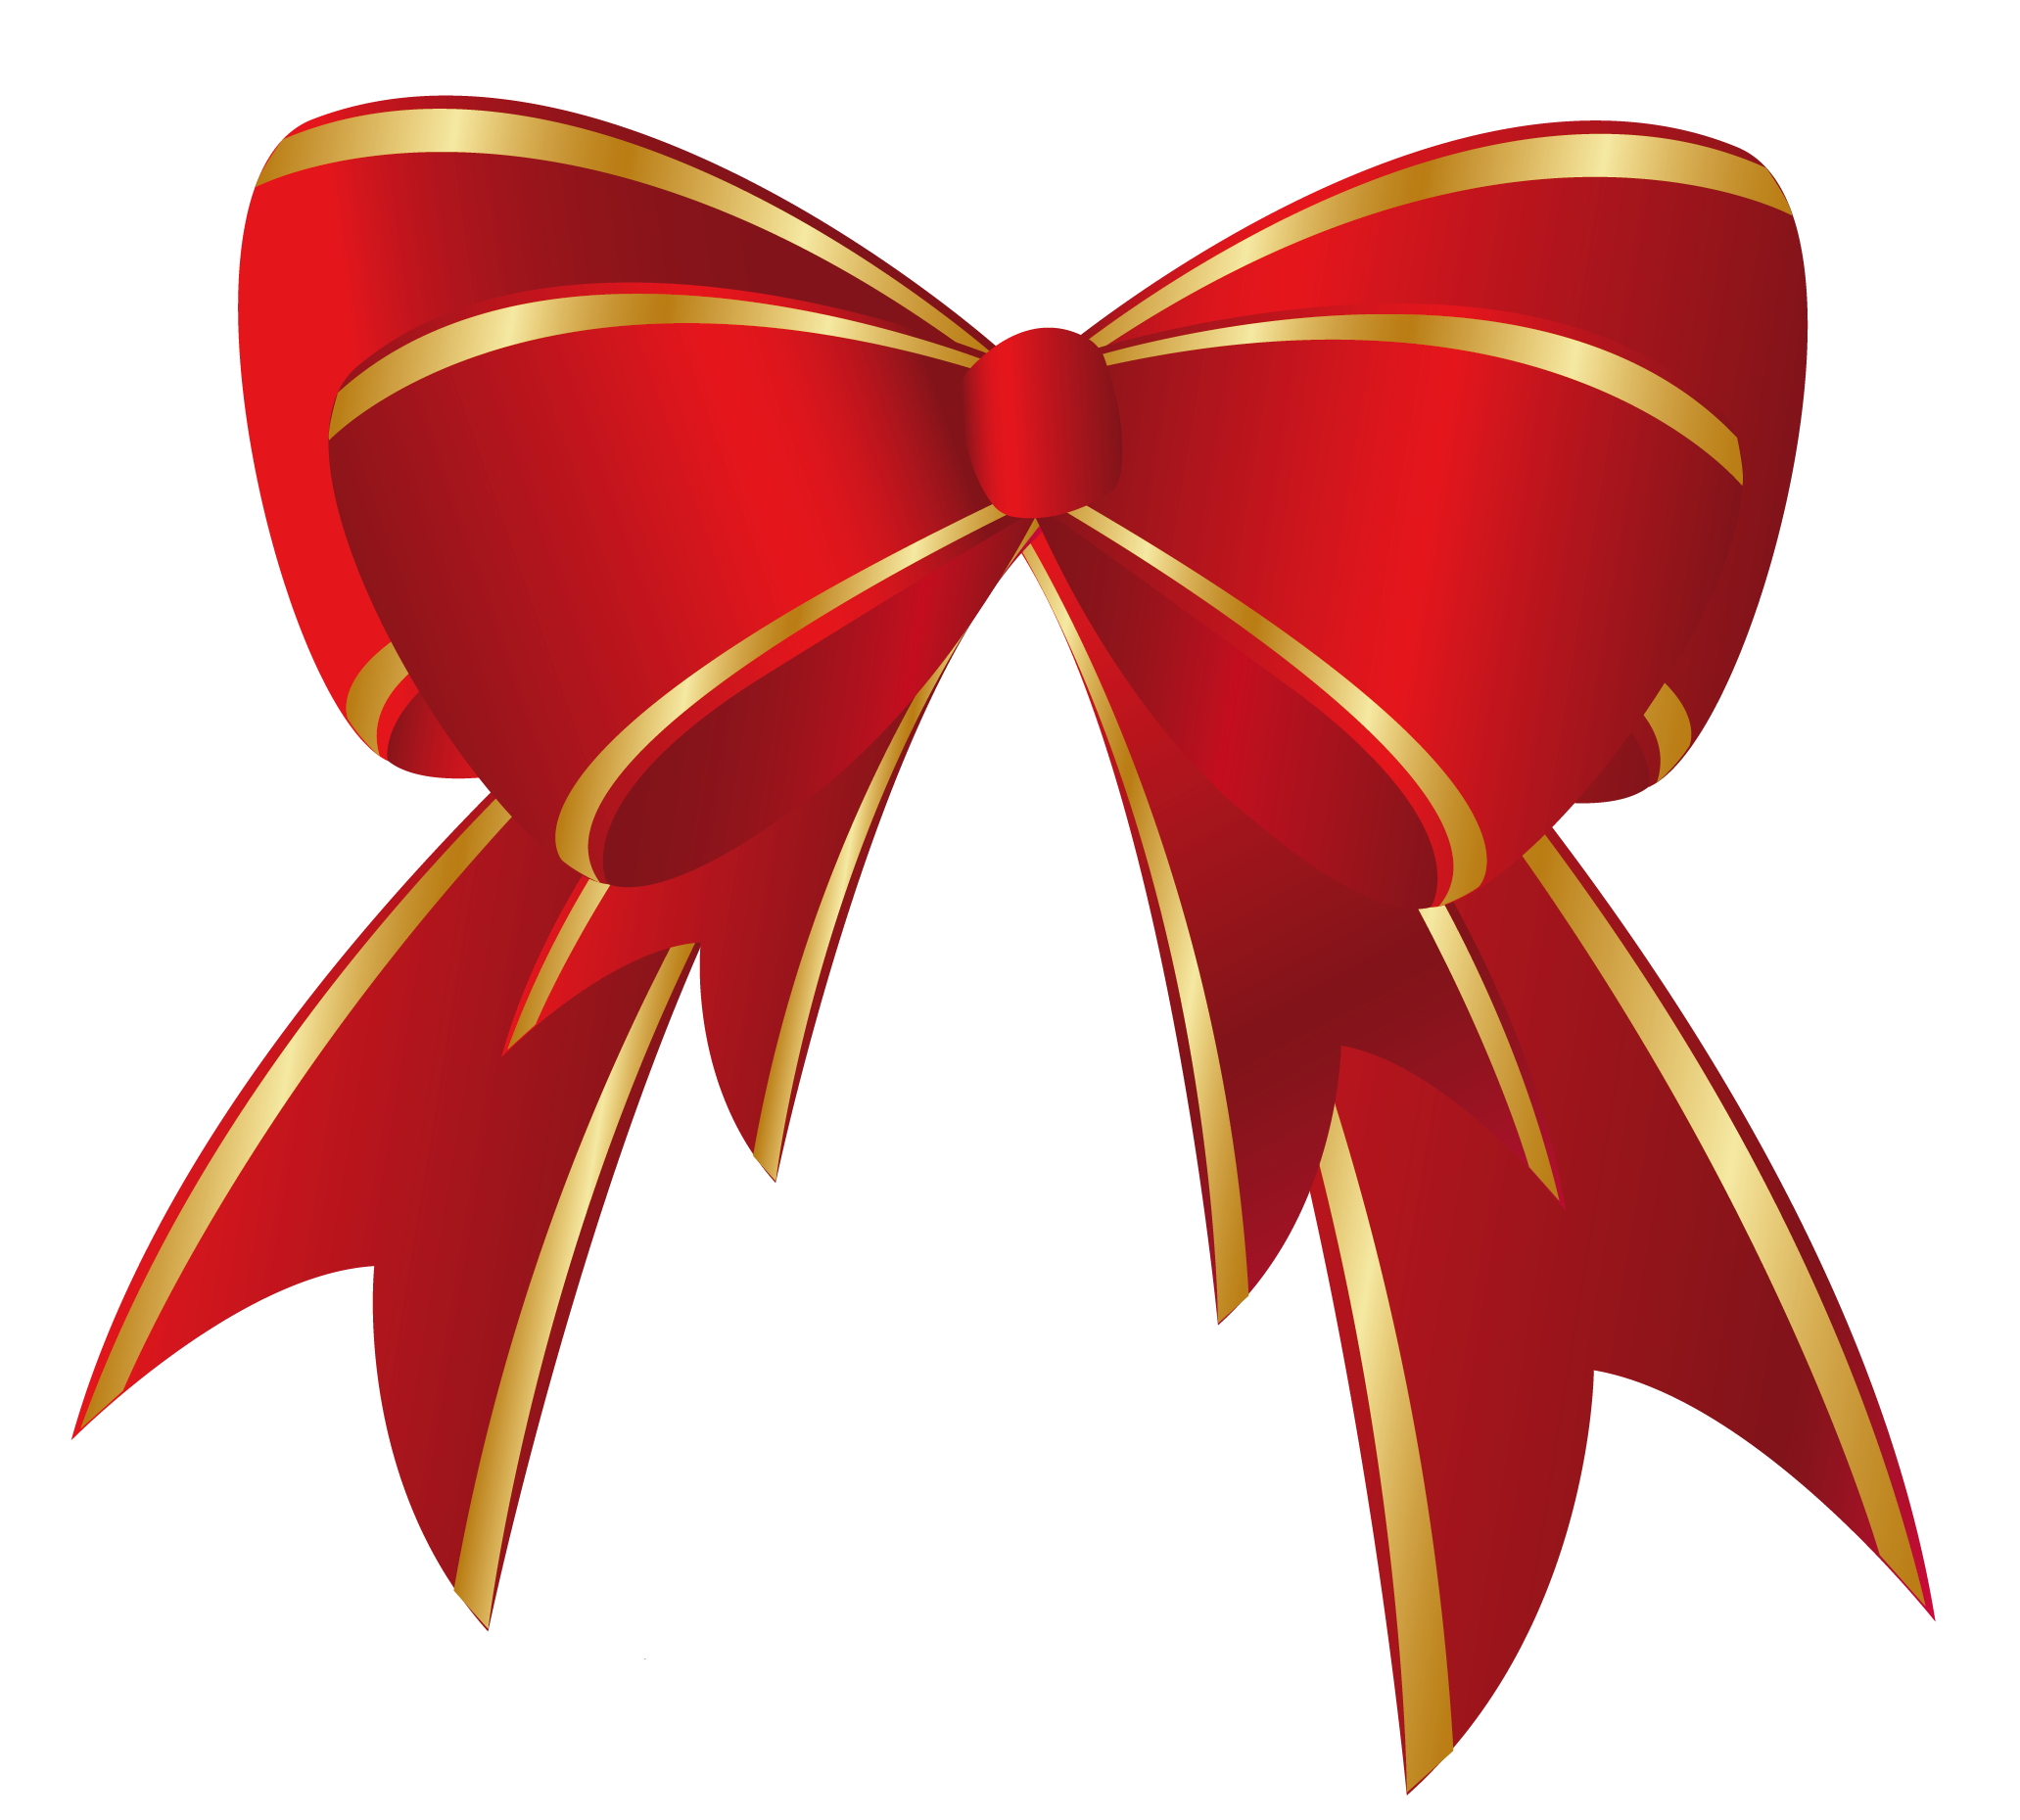 Cute Red Bow Clipart - Free .